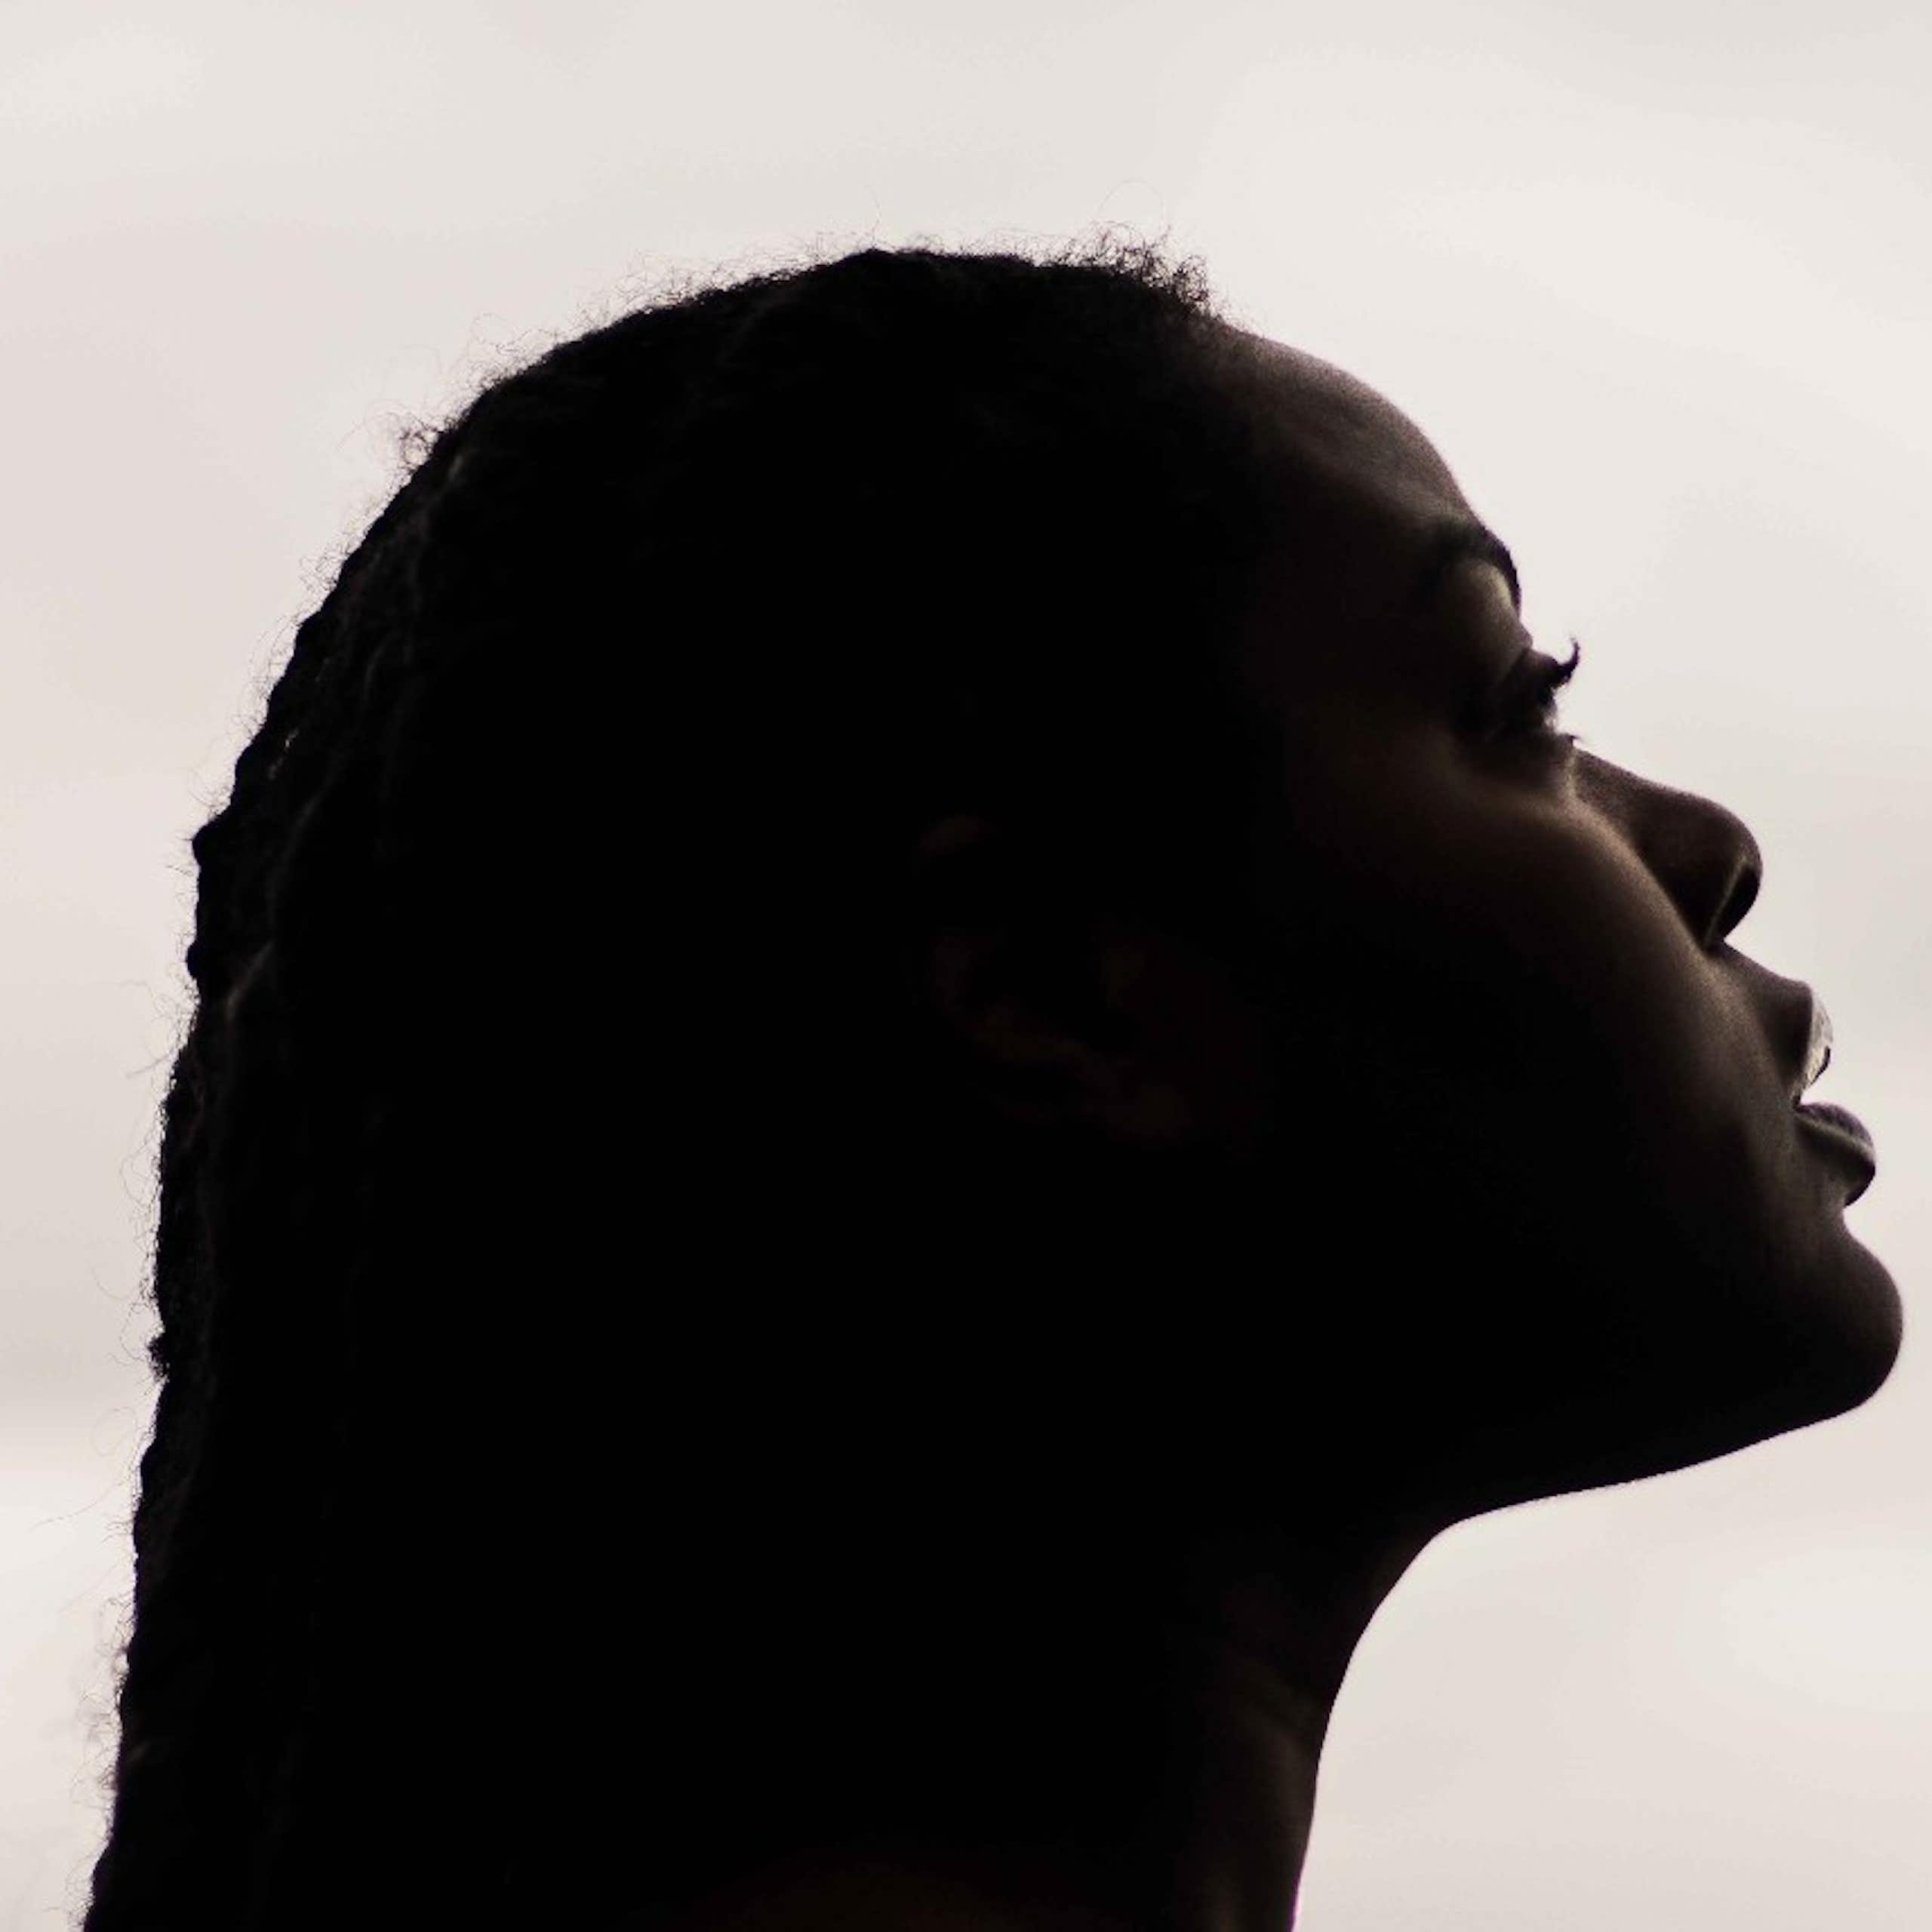 A profile of a Black woman looking slightly upwards.